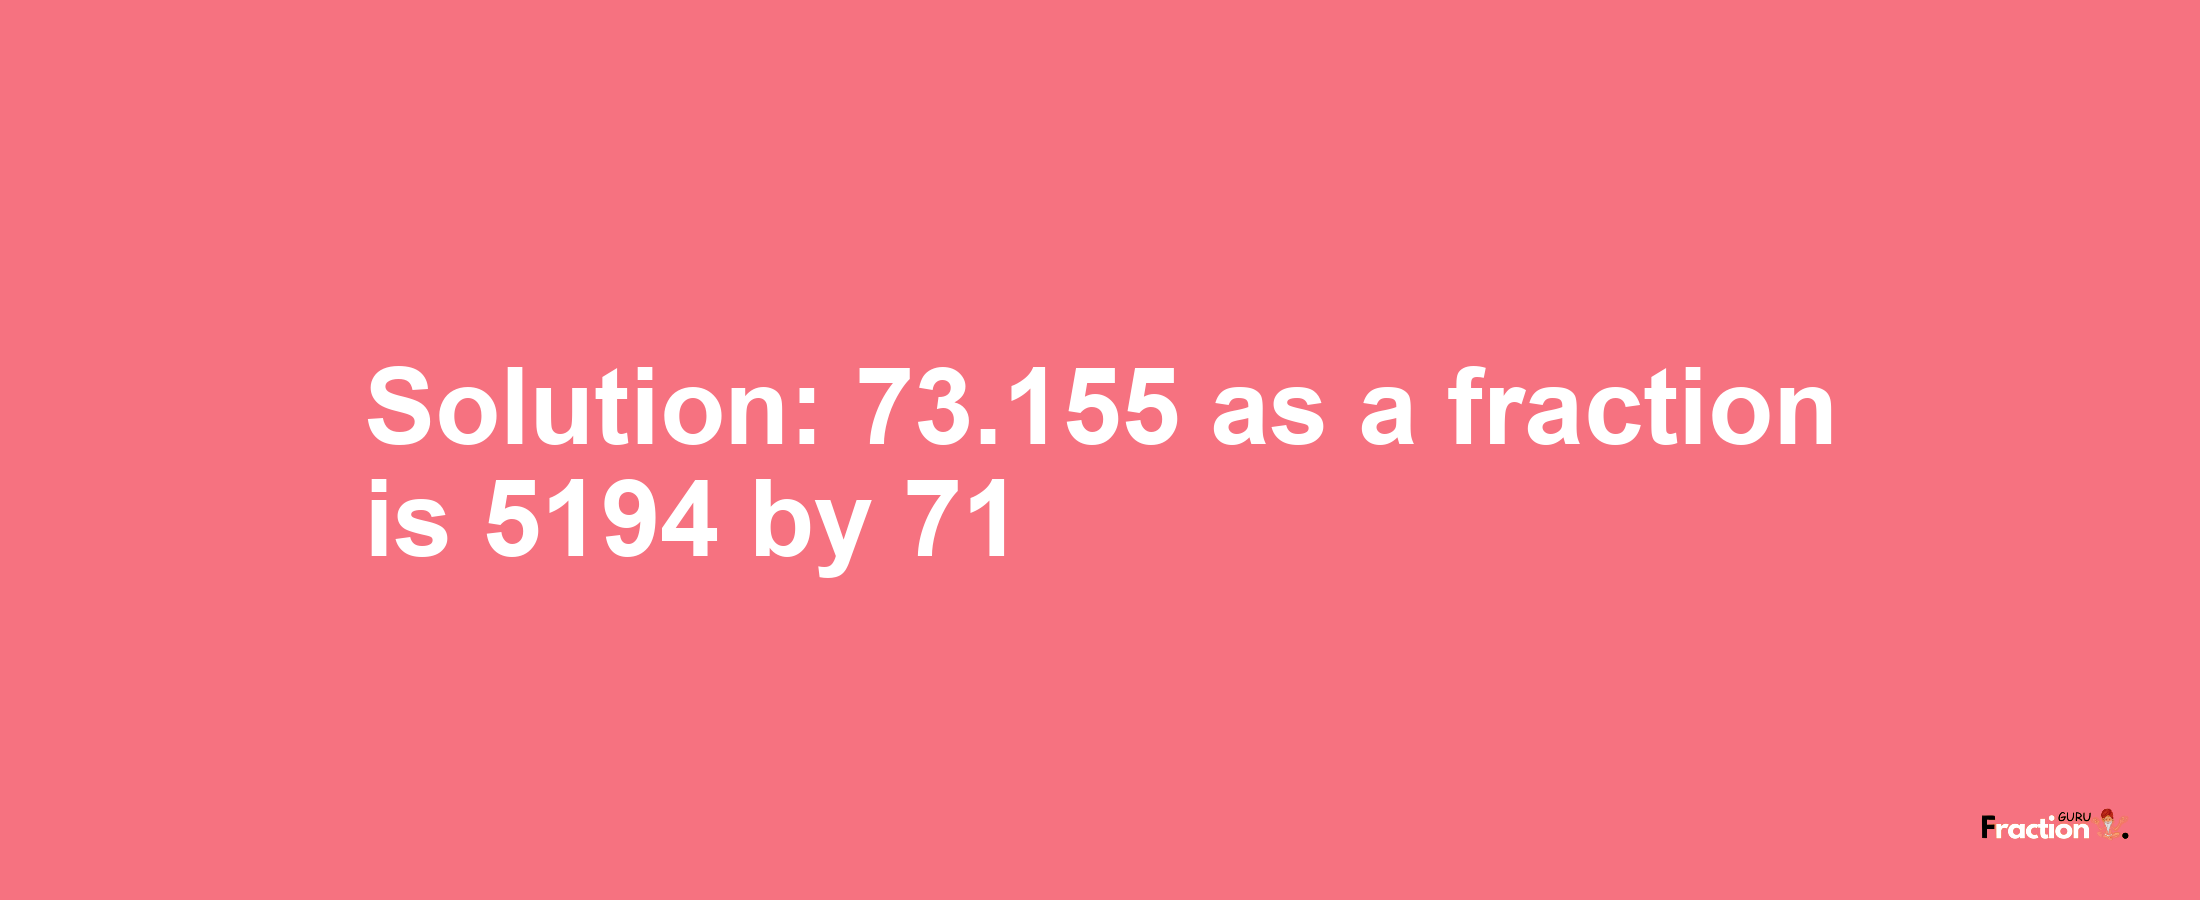 Solution:73.155 as a fraction is 5194/71